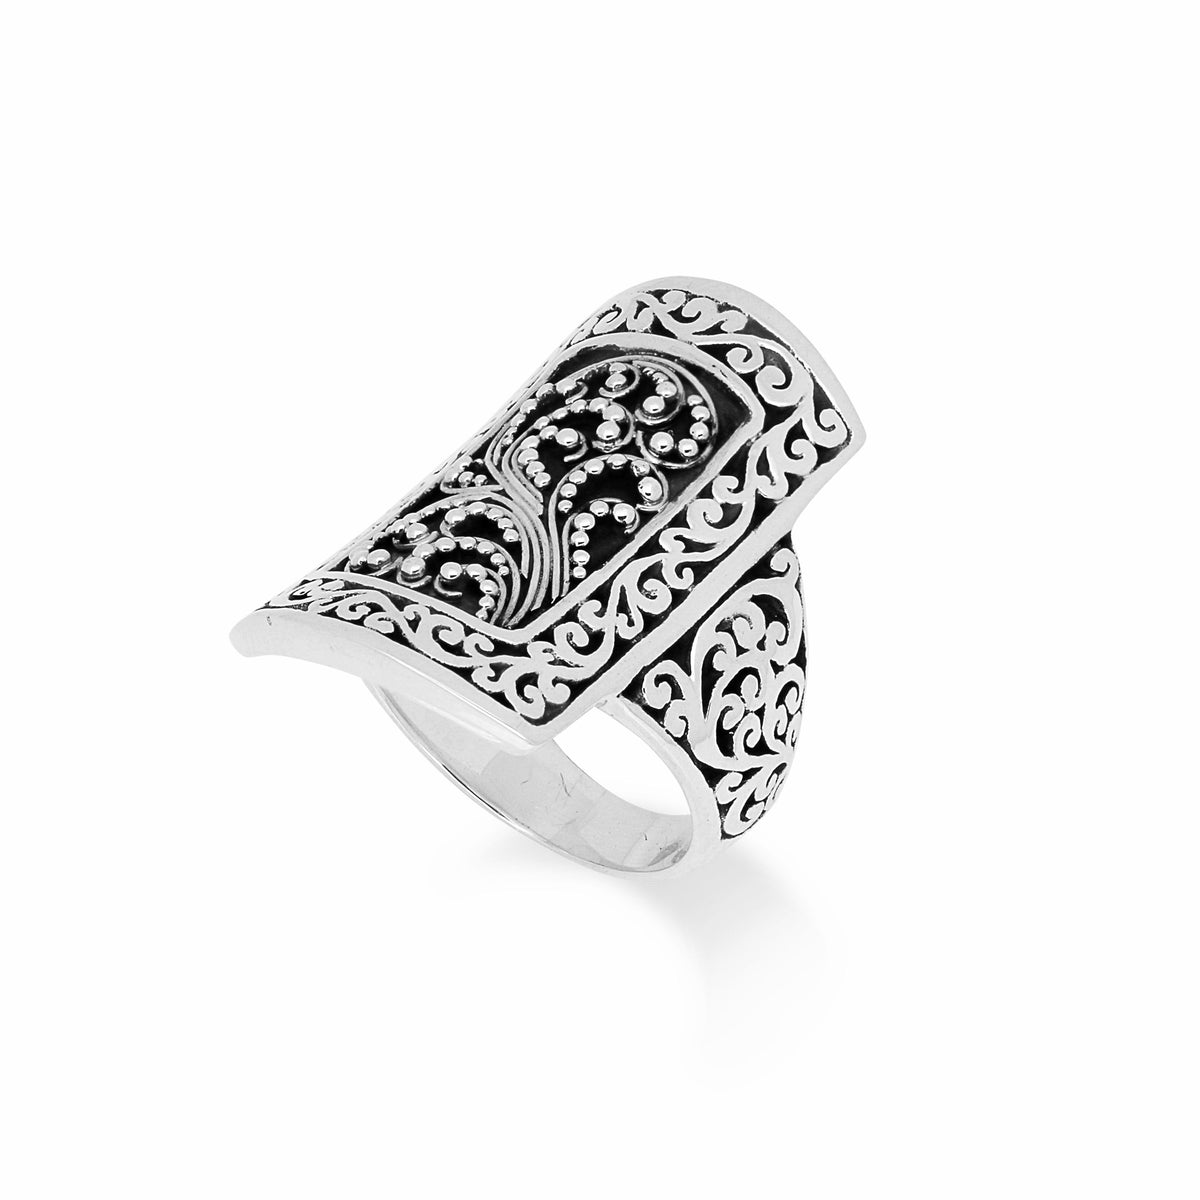 Classic Rectangular Convex Cutout and Granulated Ring. 17mm x 27mm